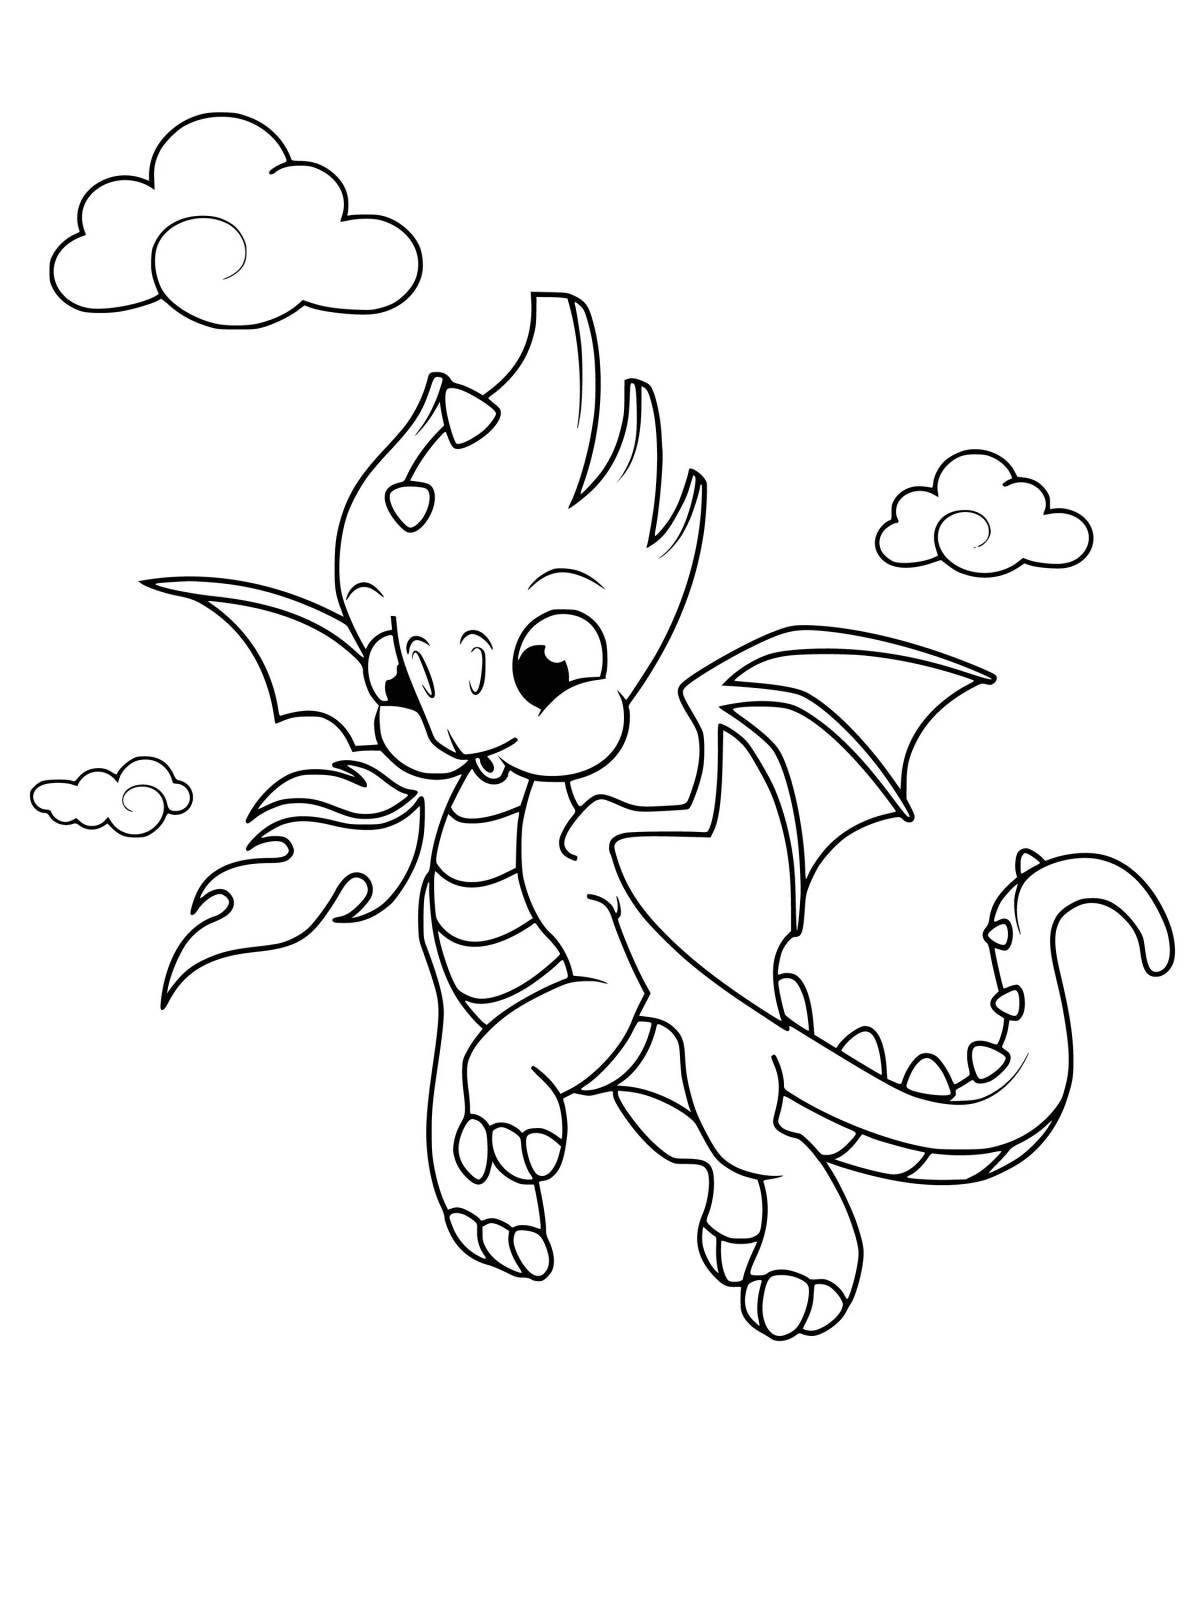 Shine dragon coloring book for girls